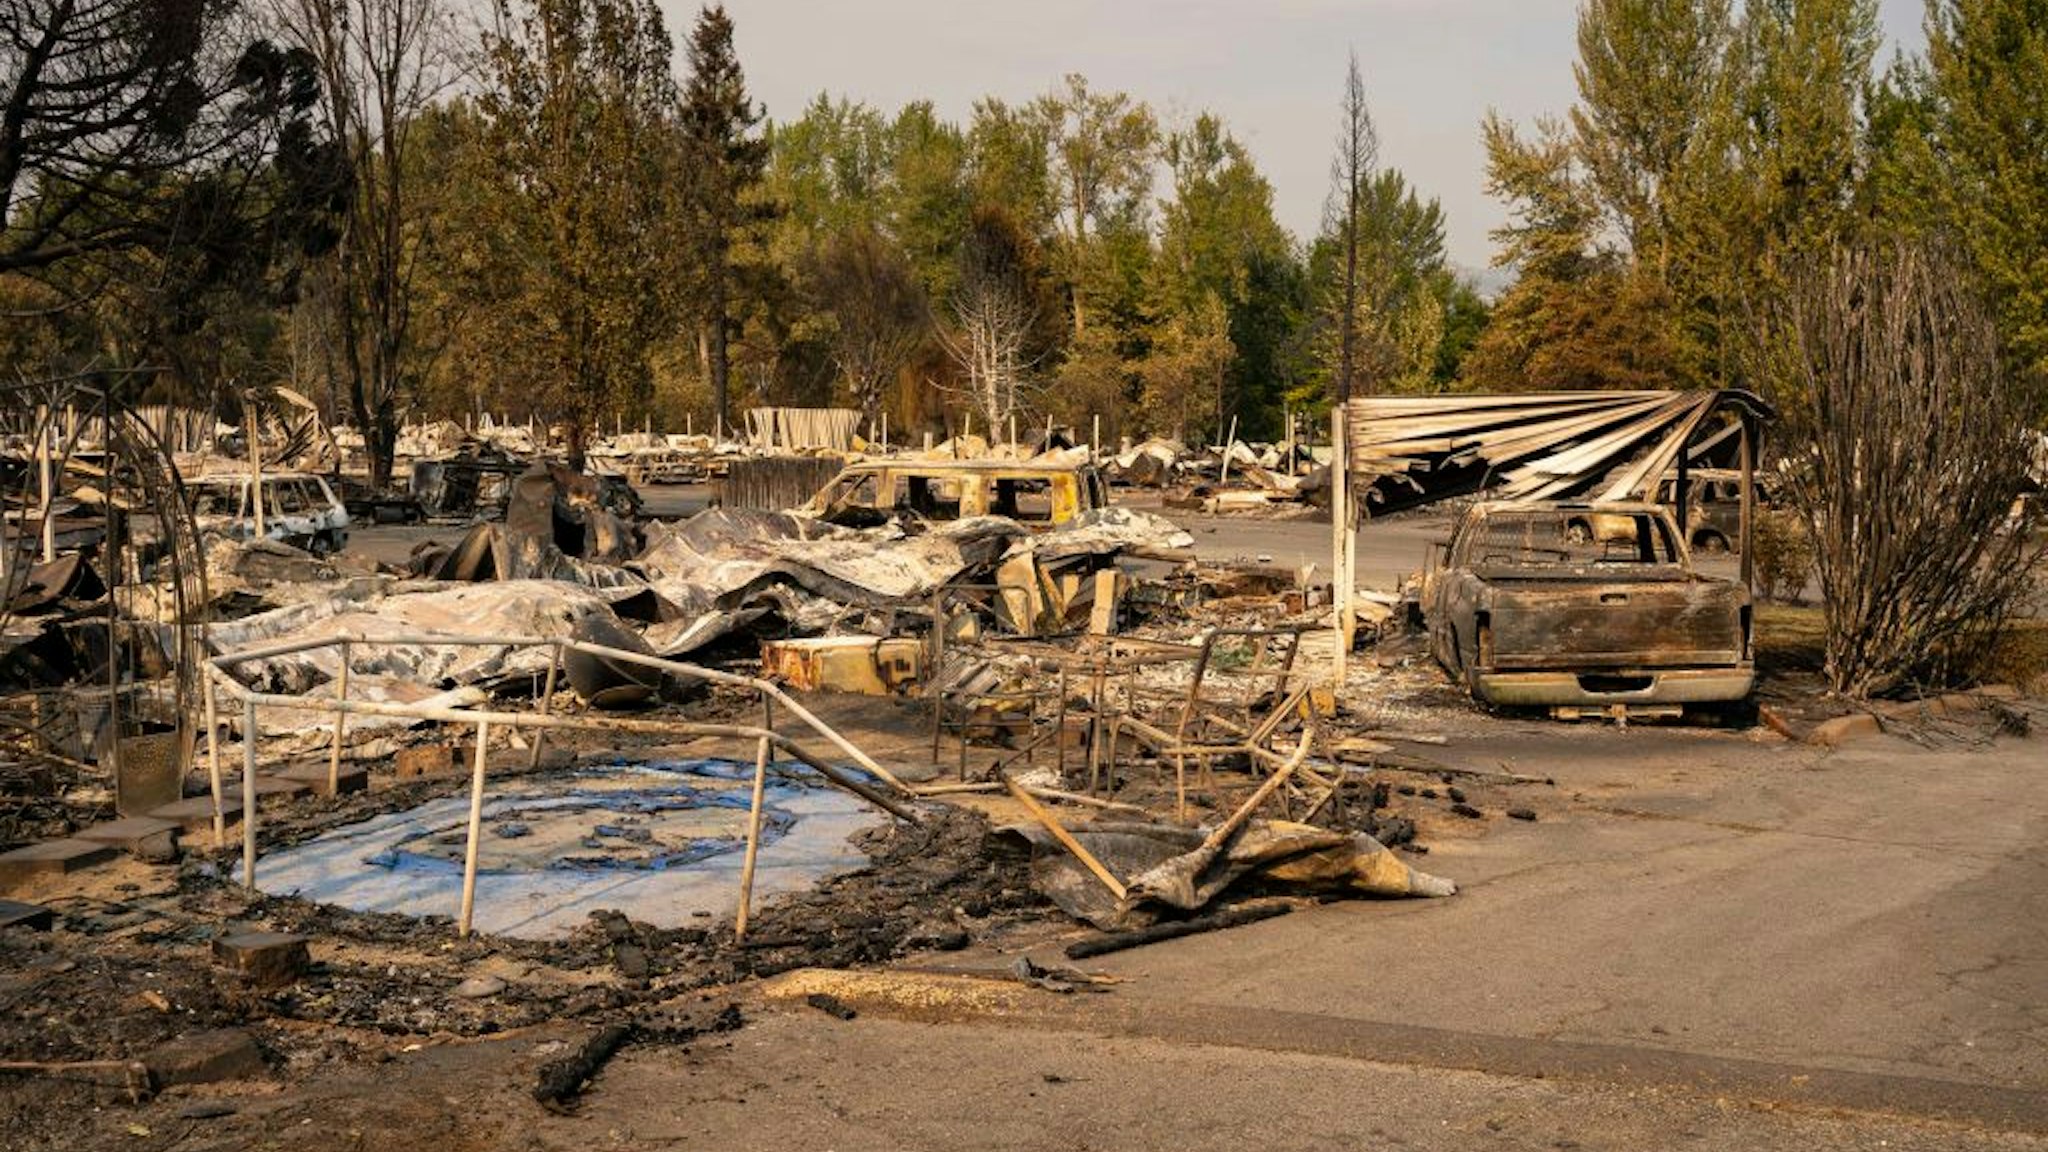 PHOENIX, OR - SEPTEMBER 10: A damaged trampoline sits in a mobile home park destroyed by fire on September 10, 2020 in Phoenix, Oregon. Hundreds of homes in the town have been lost due to wildfire.